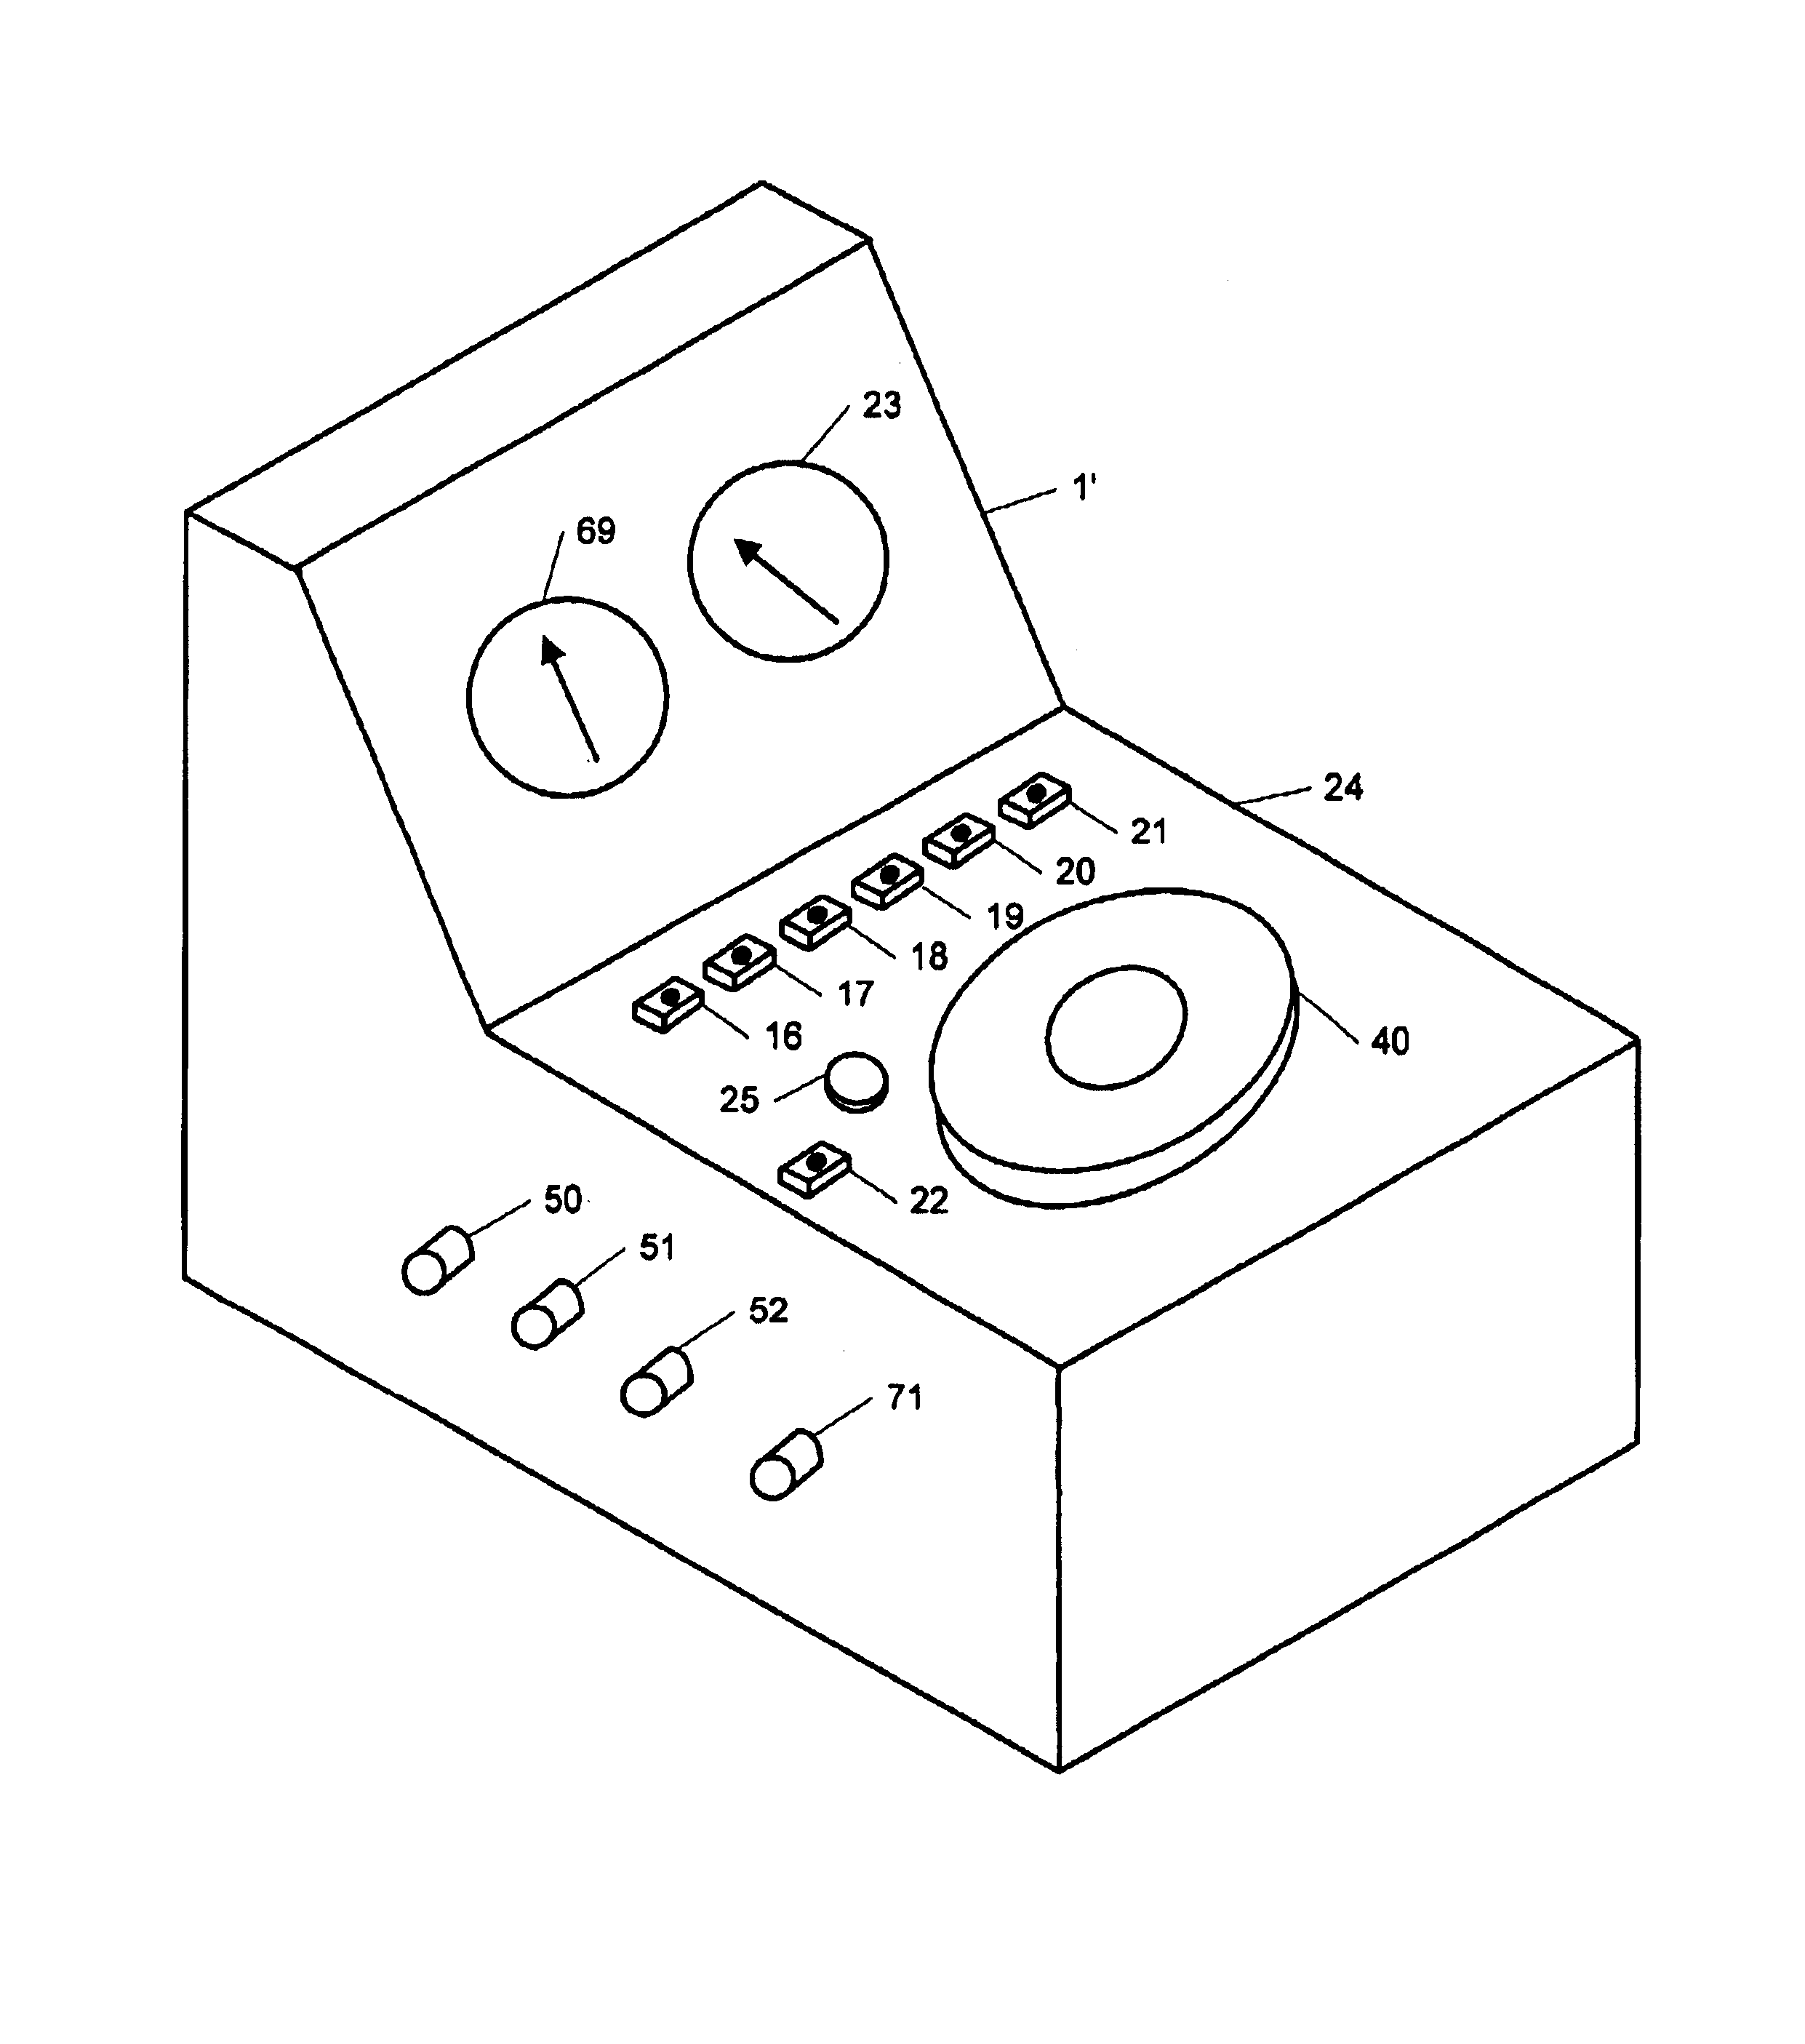 Supercritical point drying apparatus for semiconductor device manufacturing and bio-medical sample processing